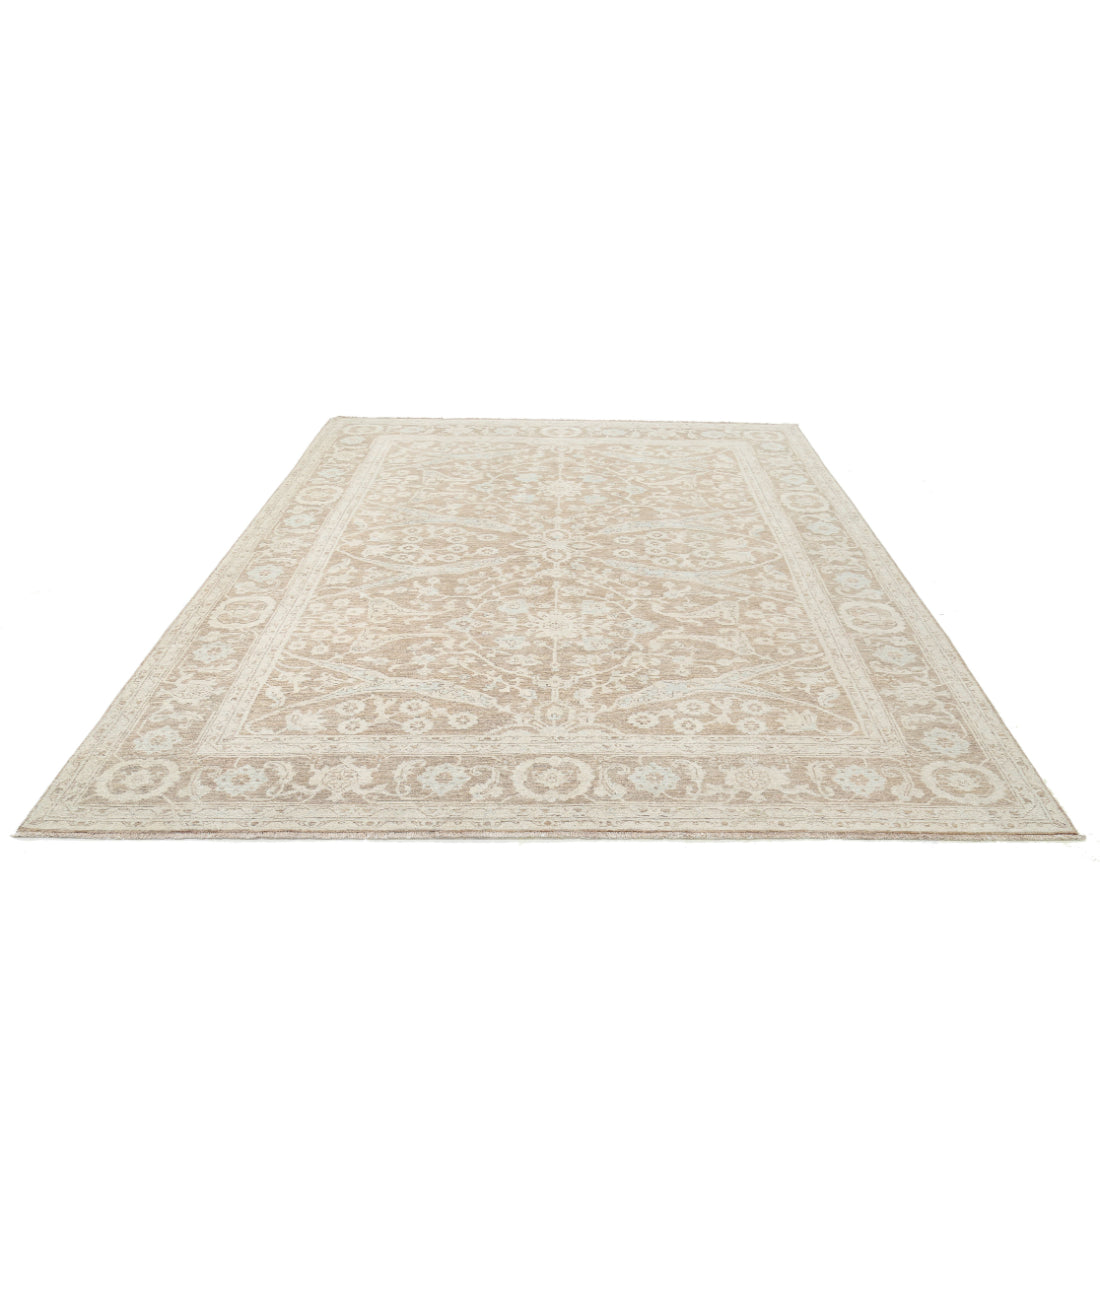 Hand Knotted Serenity Wool Rug - 8'3'' x 10'4'' 8'3'' x 10'4'' (248 X 310) / Brown / Ivory